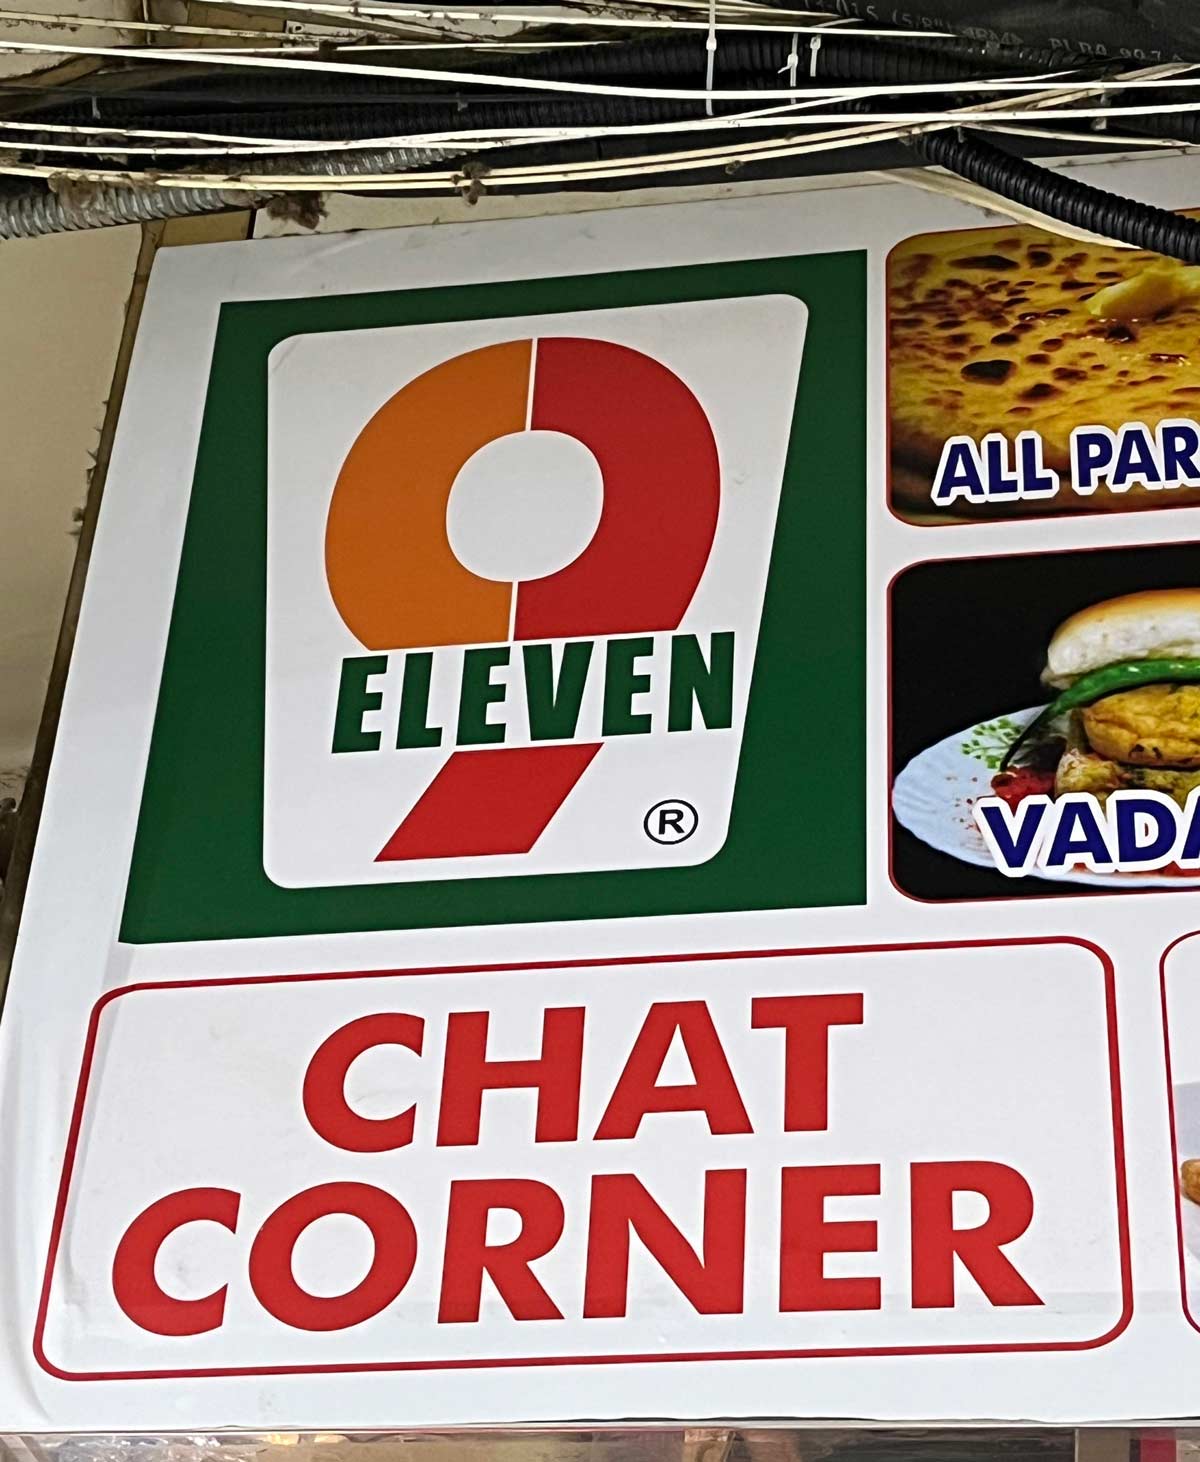 Off-brand 7-Eleven picks the worst name possible